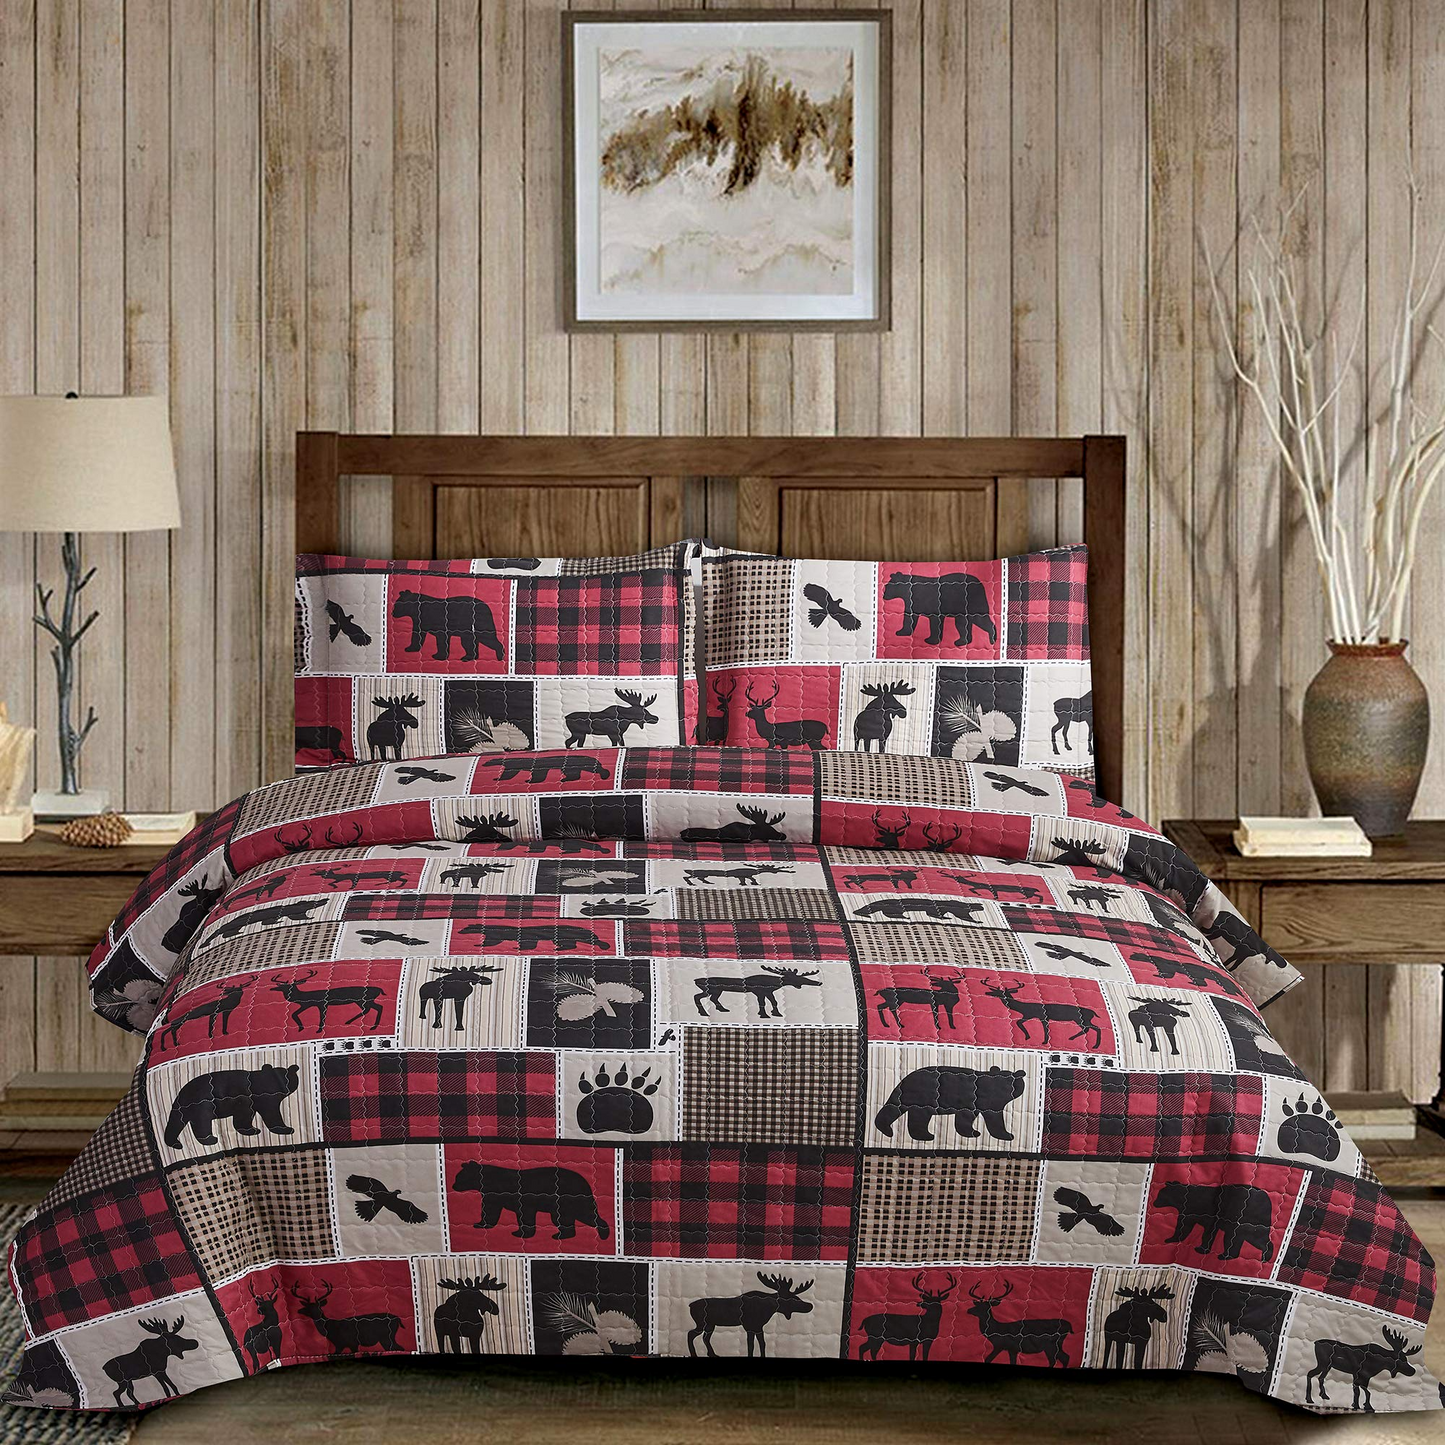 Animal Square Stitching Quilt Set Coverlet with 2 Pillowcases